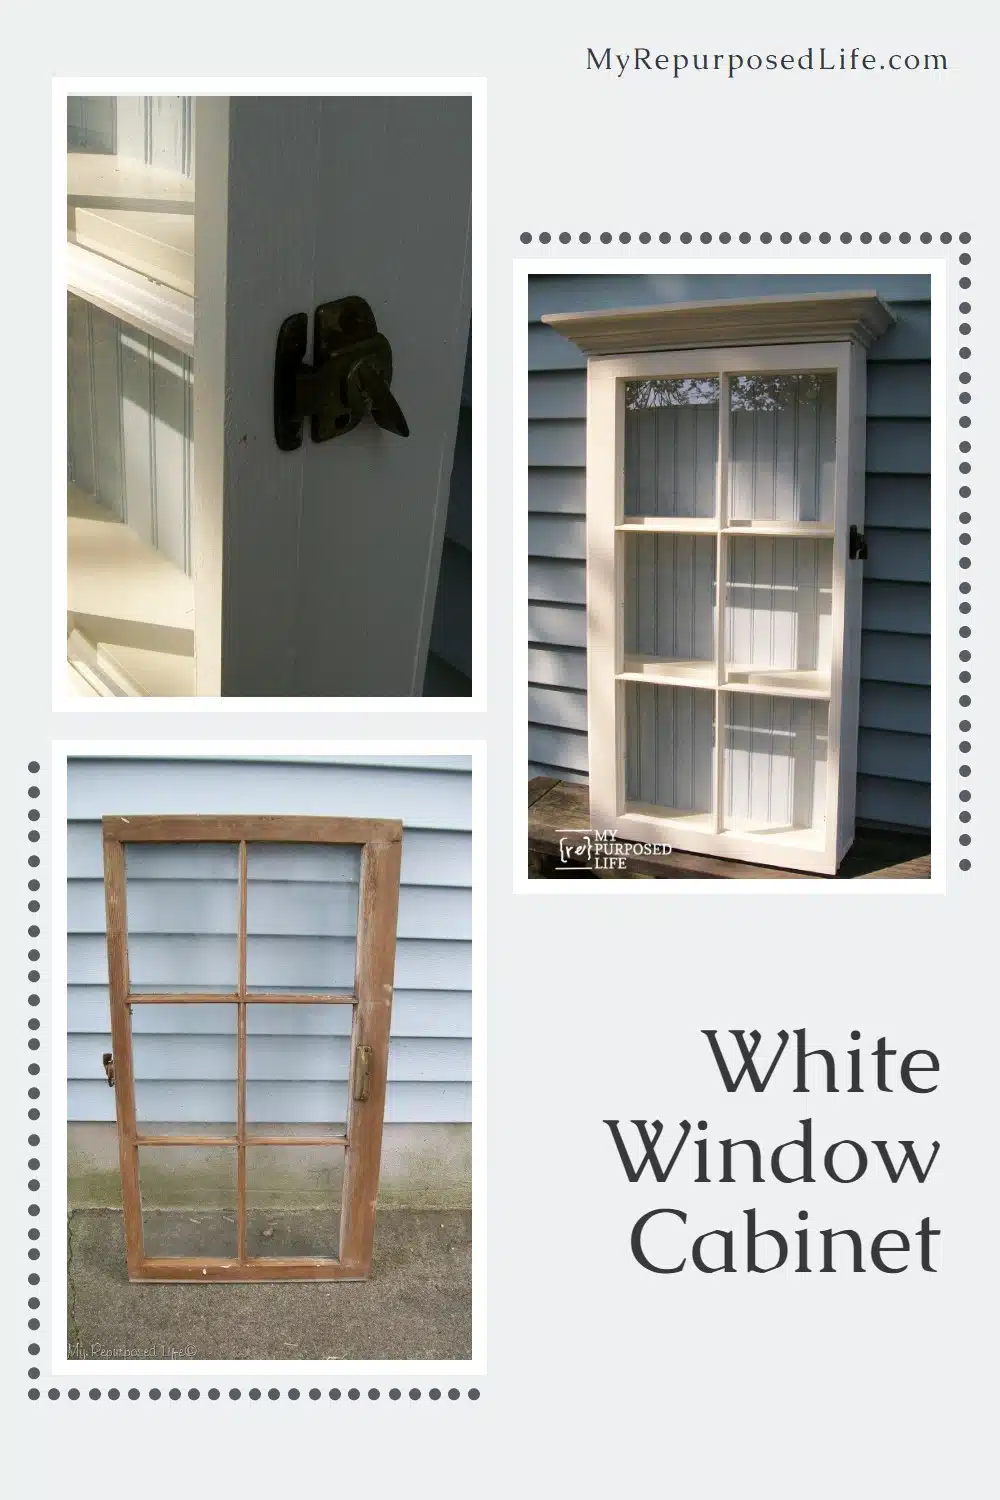 How to make a repurposed window cabinet using an old window and a shelf as crown molding. Step by step picture tutorial using reclaimed bits and pieces. #MyRepurposedLife #upcycle #window #cabinet #project via @repurposedlife